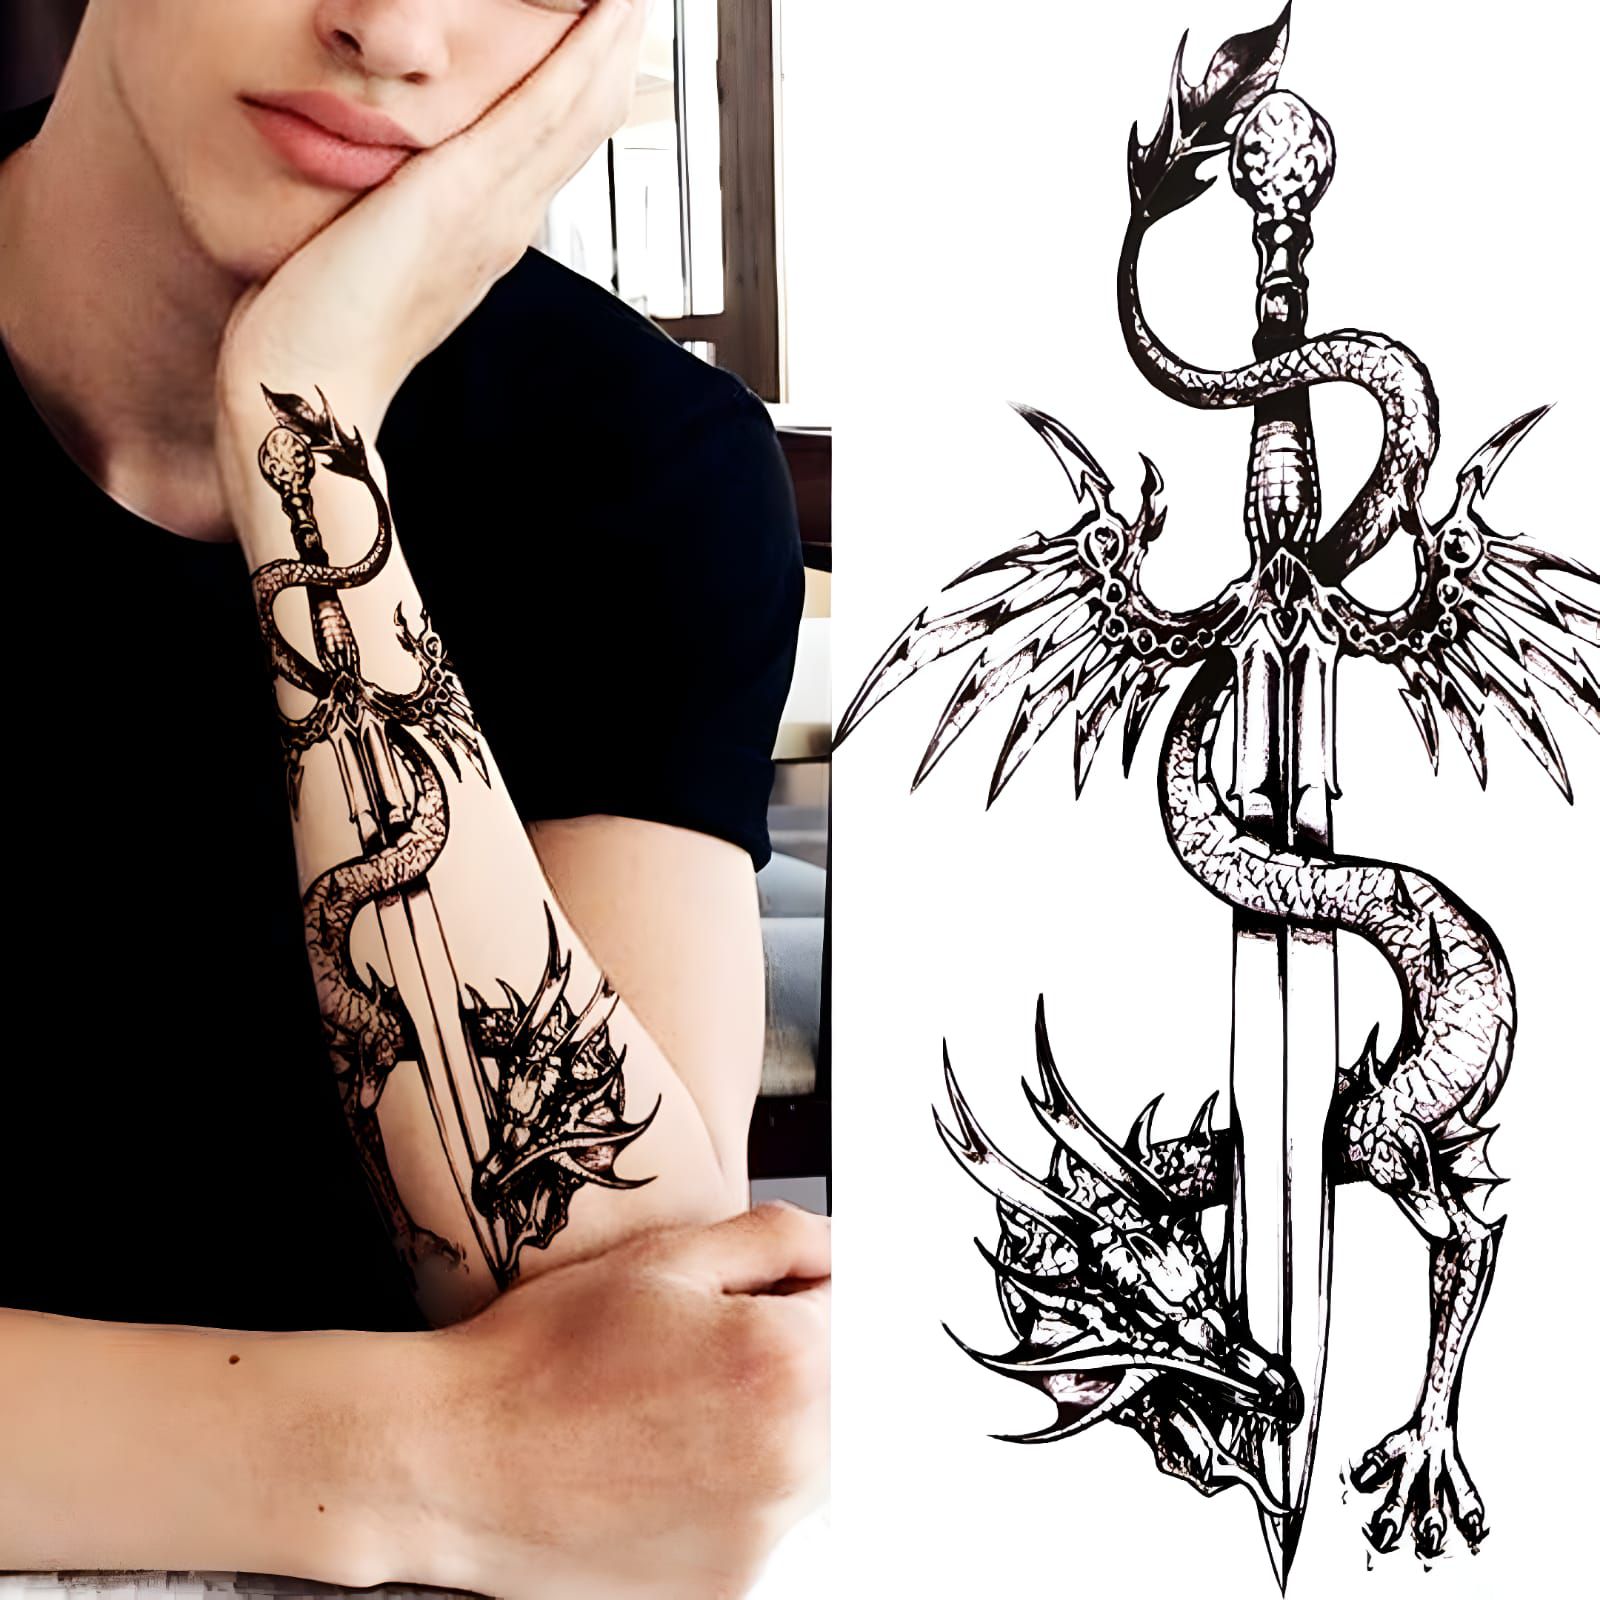 AWLEE Temporary Tattoos for Men and women,10 Sheets Nigeria | Ubuy